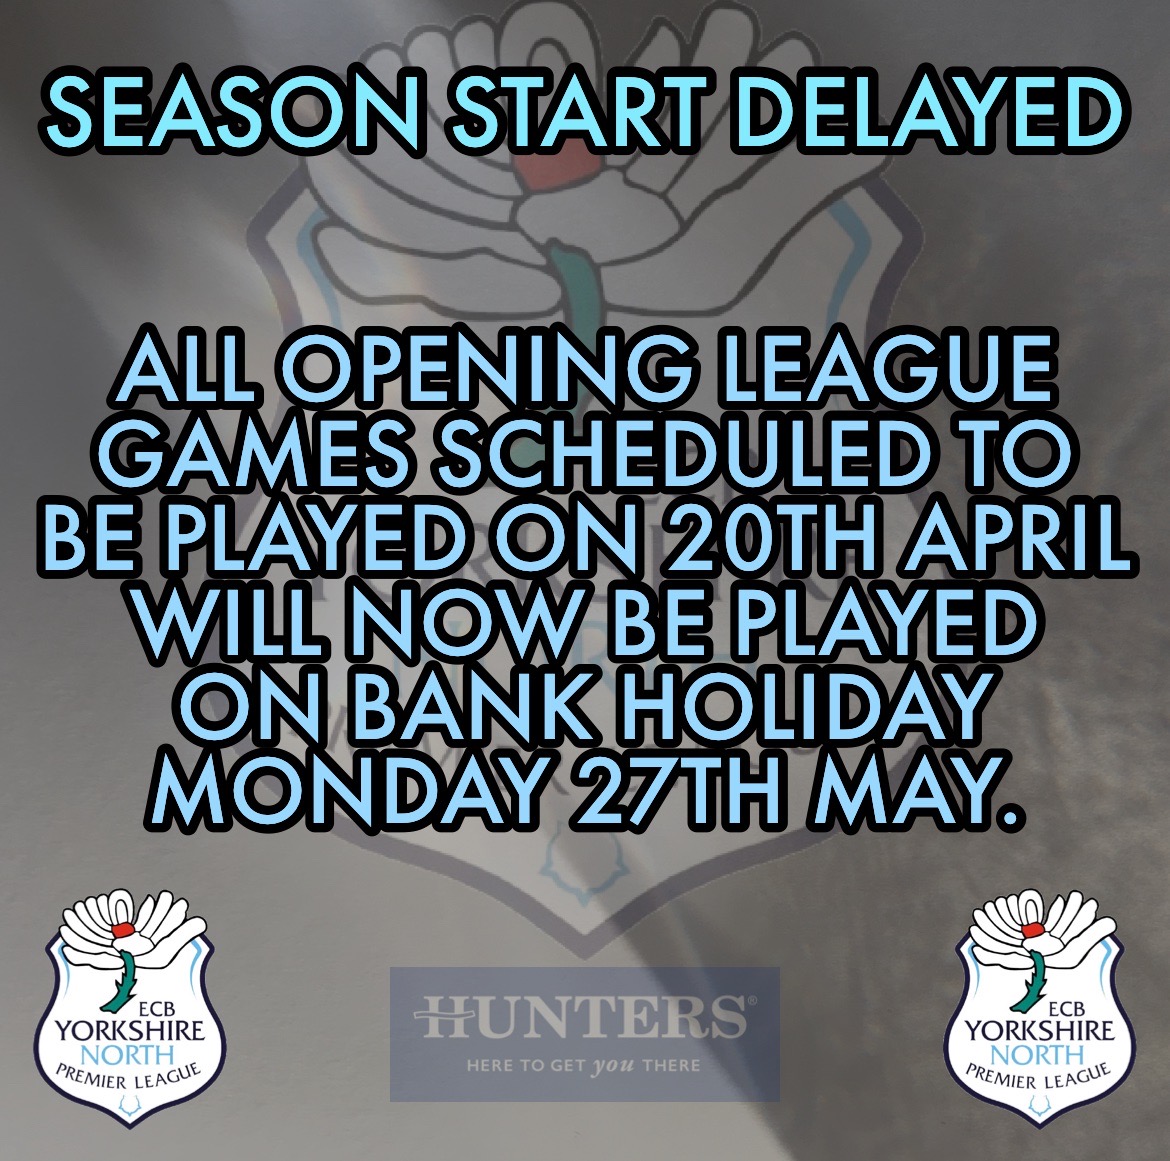 Last night emails were sent to clubs confirming the opening weekend games on 20th April will now be played on Monday 27th May. The season will now begin April 27th